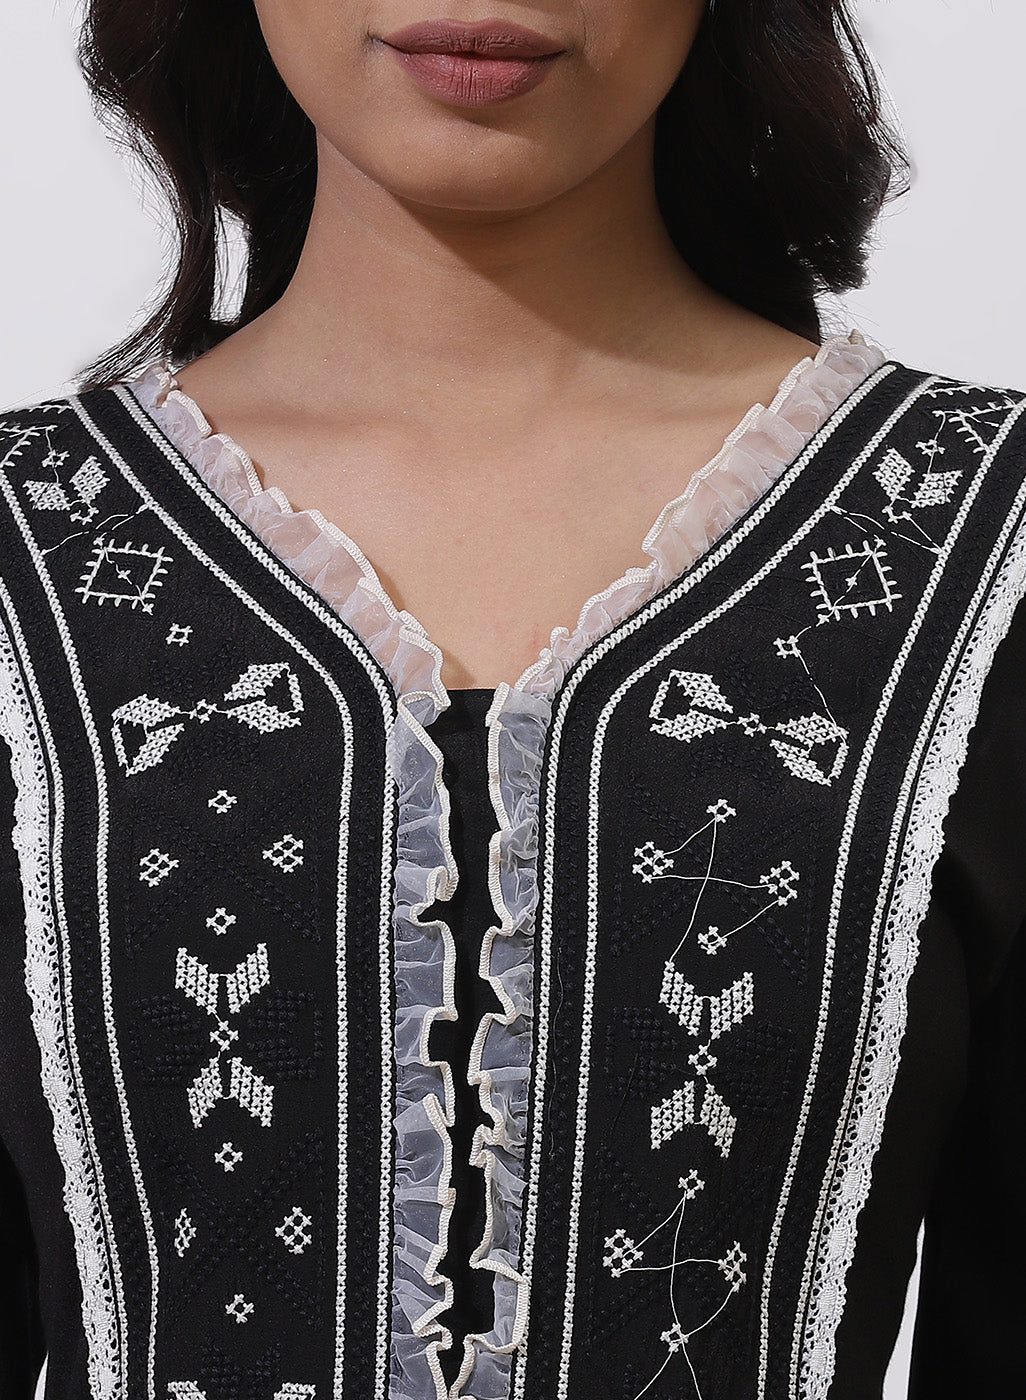 Black Tunic With Embroidery &amp; Lace